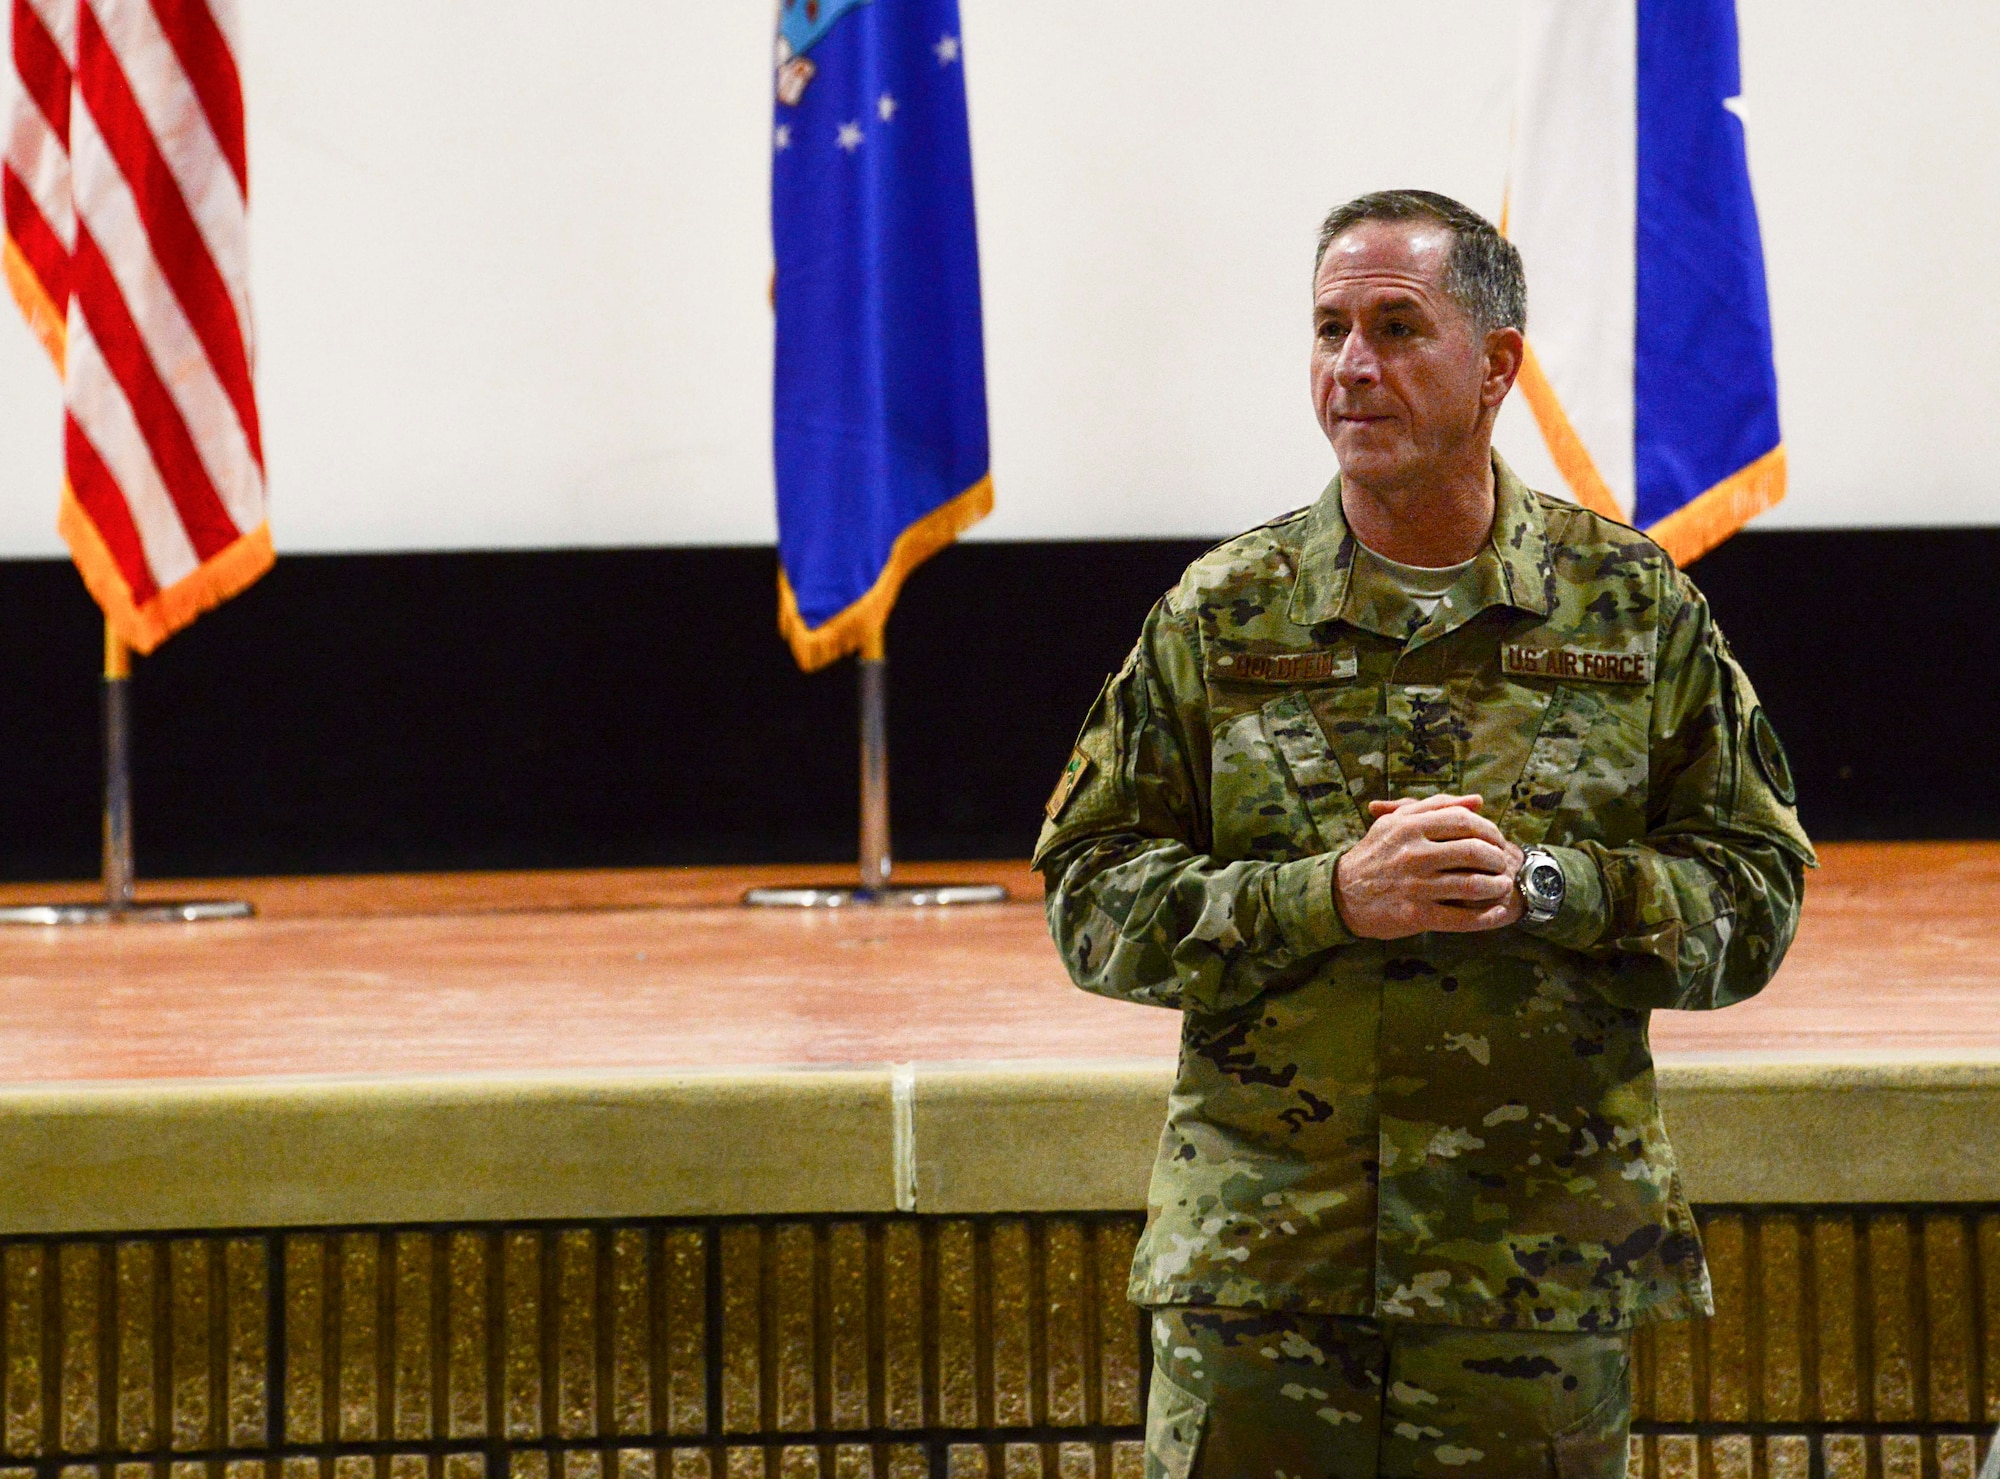 Chief of Staff of the Air Force Gen. David L. Goldfein discusses his top priorities with deployed Airmen during an all-call Aug. 14, 2016, at Al Udeid Air Base, Qatar. Goldfein also discussed the current state of the Air Force and what he envisions as the future of the force. (U.S. Air Force photo/Senior Airman Janelle Patiño/Released)